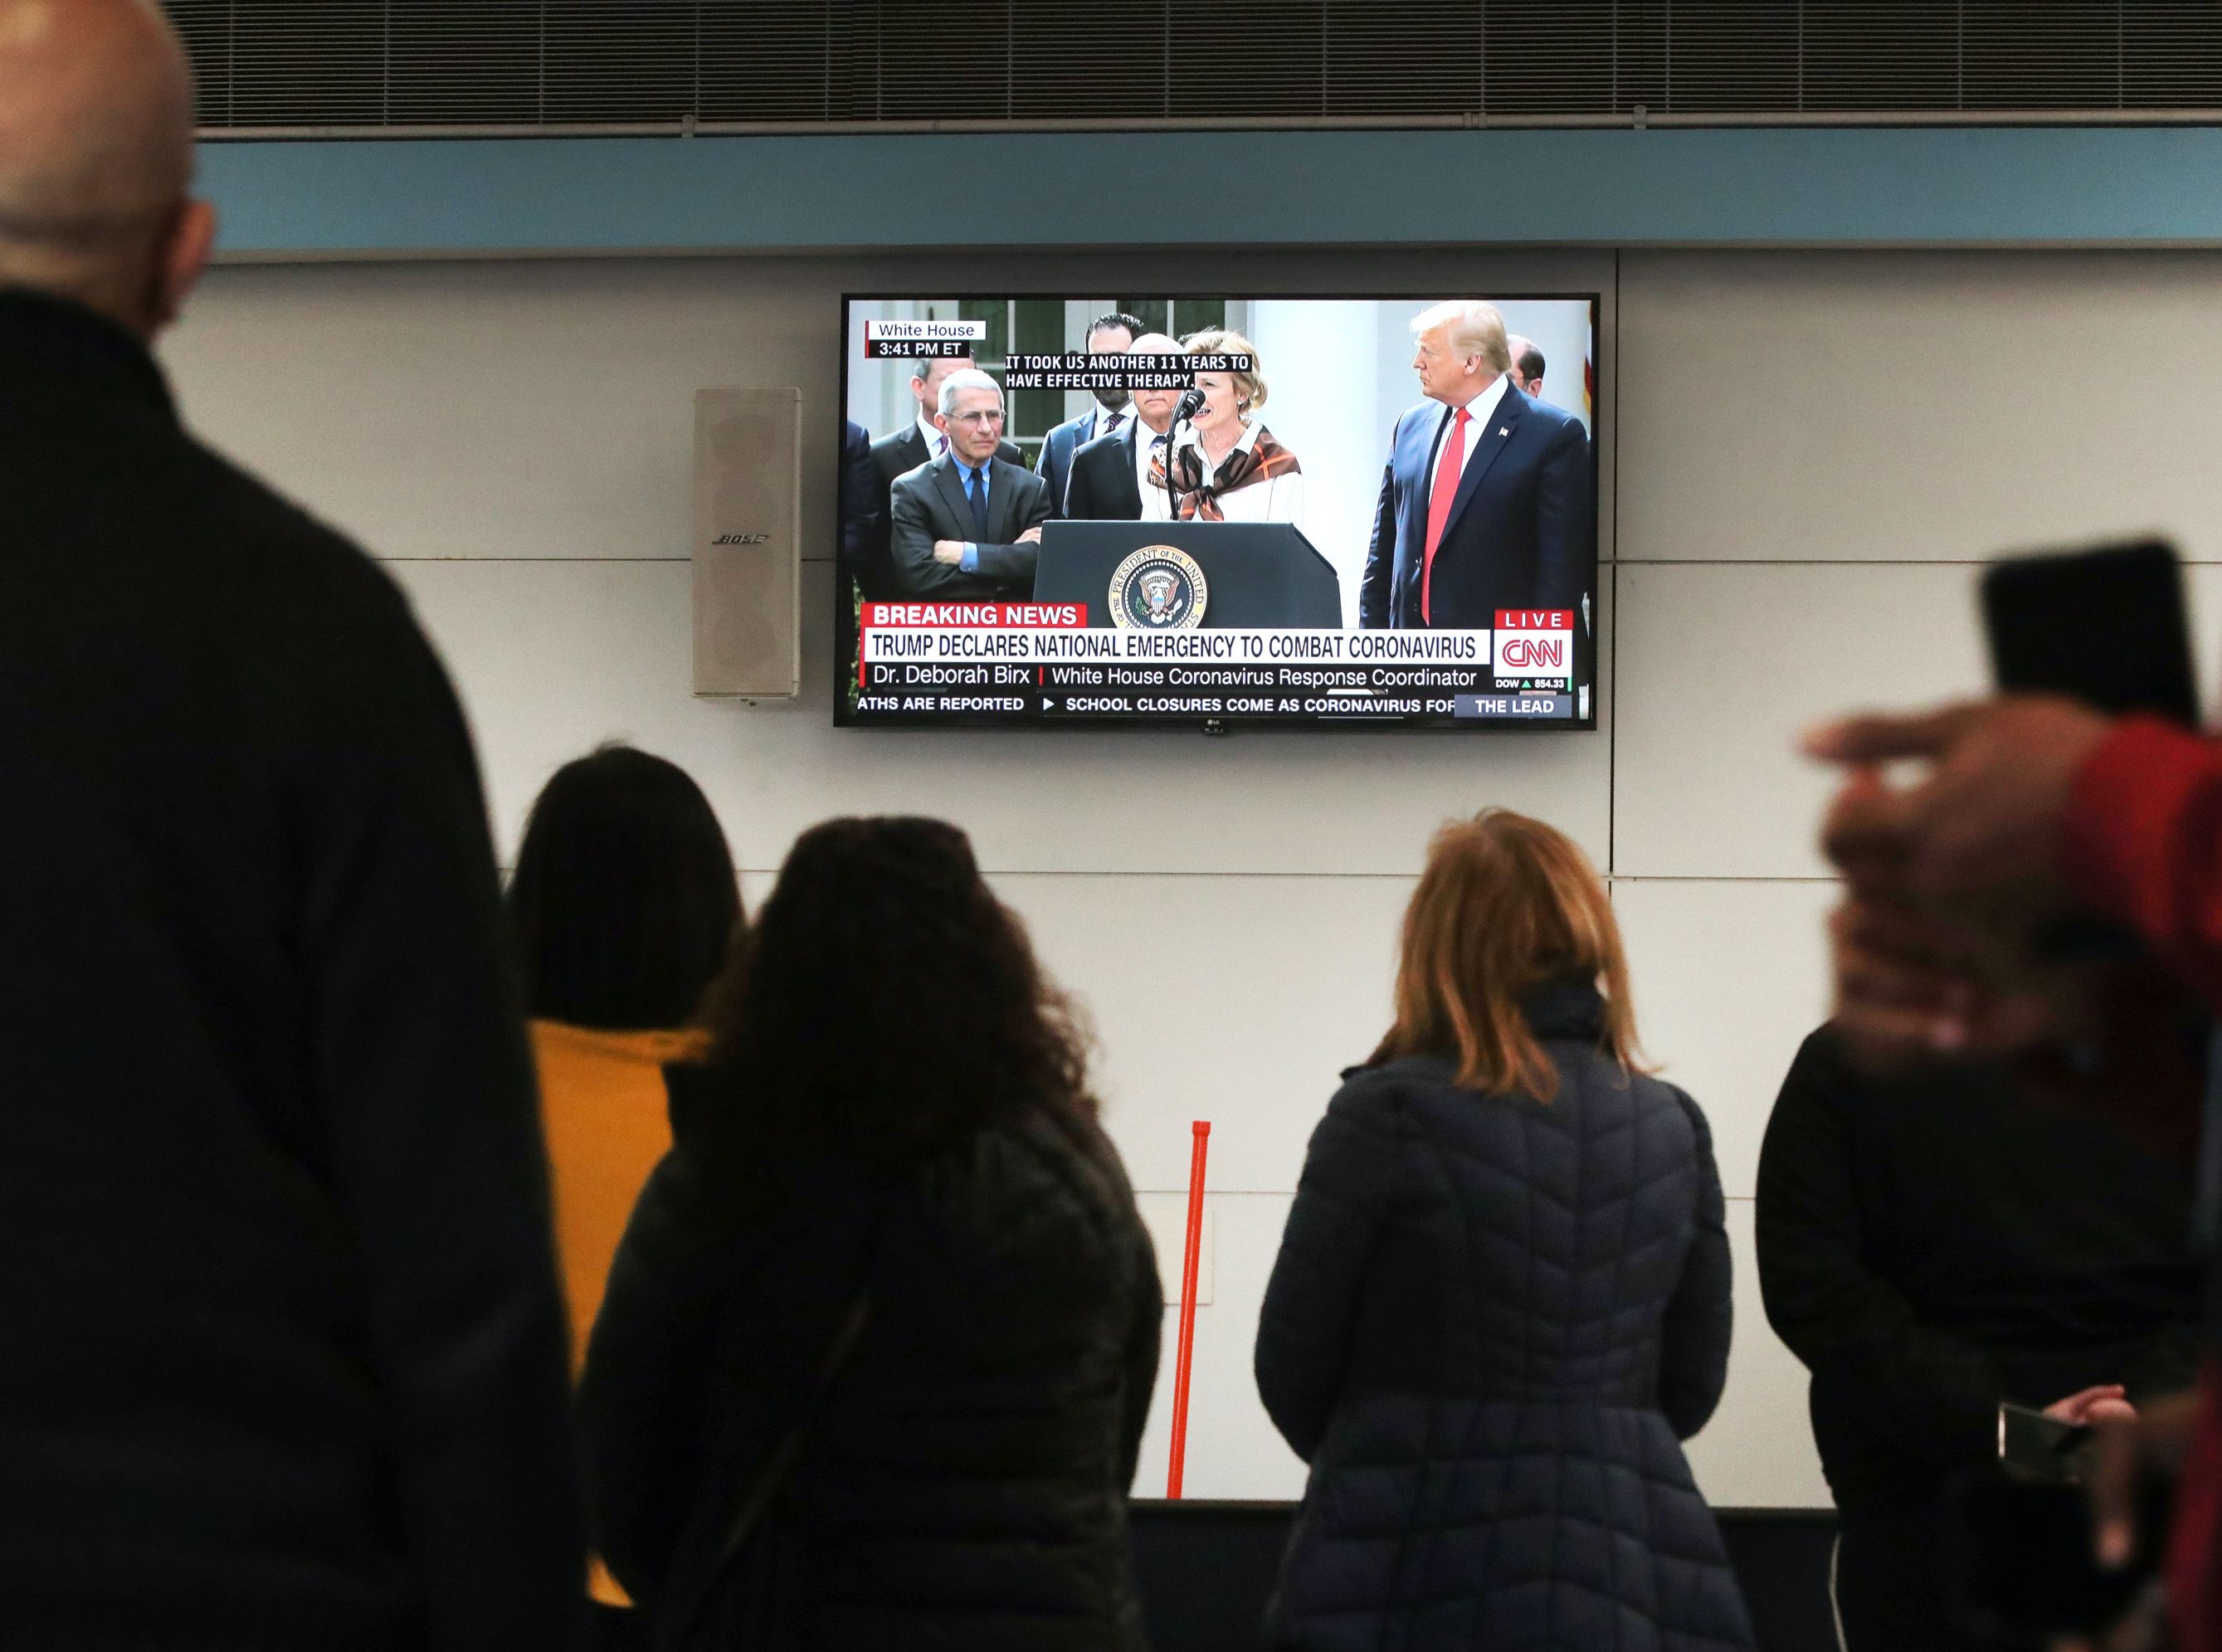  People waiting to meet travelers arriving at O'Hare Airport watch as U.S. President Trump hold a news conference about the coronavirus pandemic on March 13, 2020 in Chicago, Illinois. 